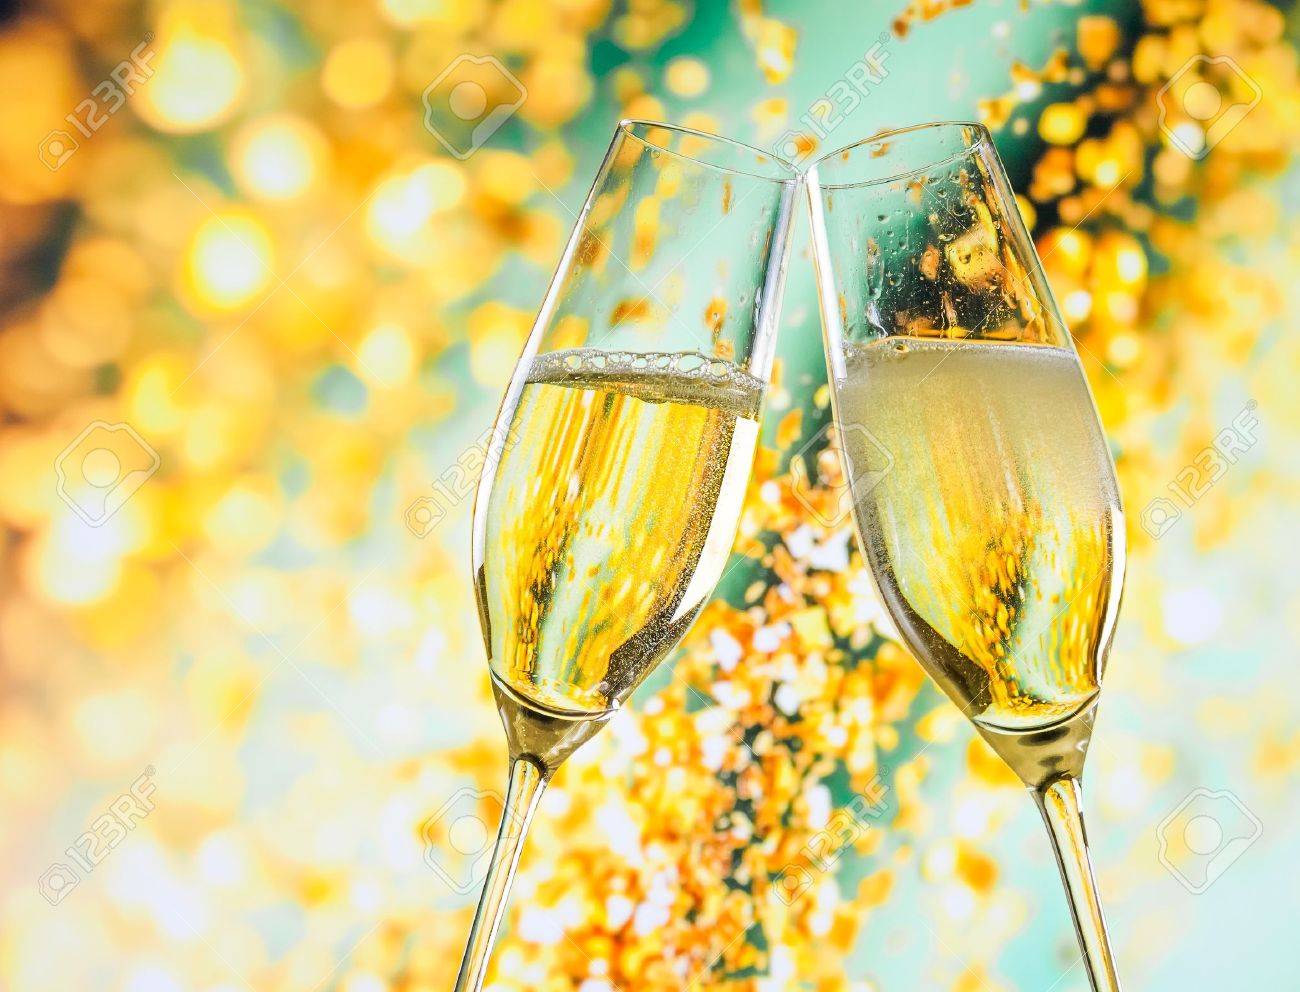 A Pair Of Champagne Flutes With Golden Bubbles Make Cheers On